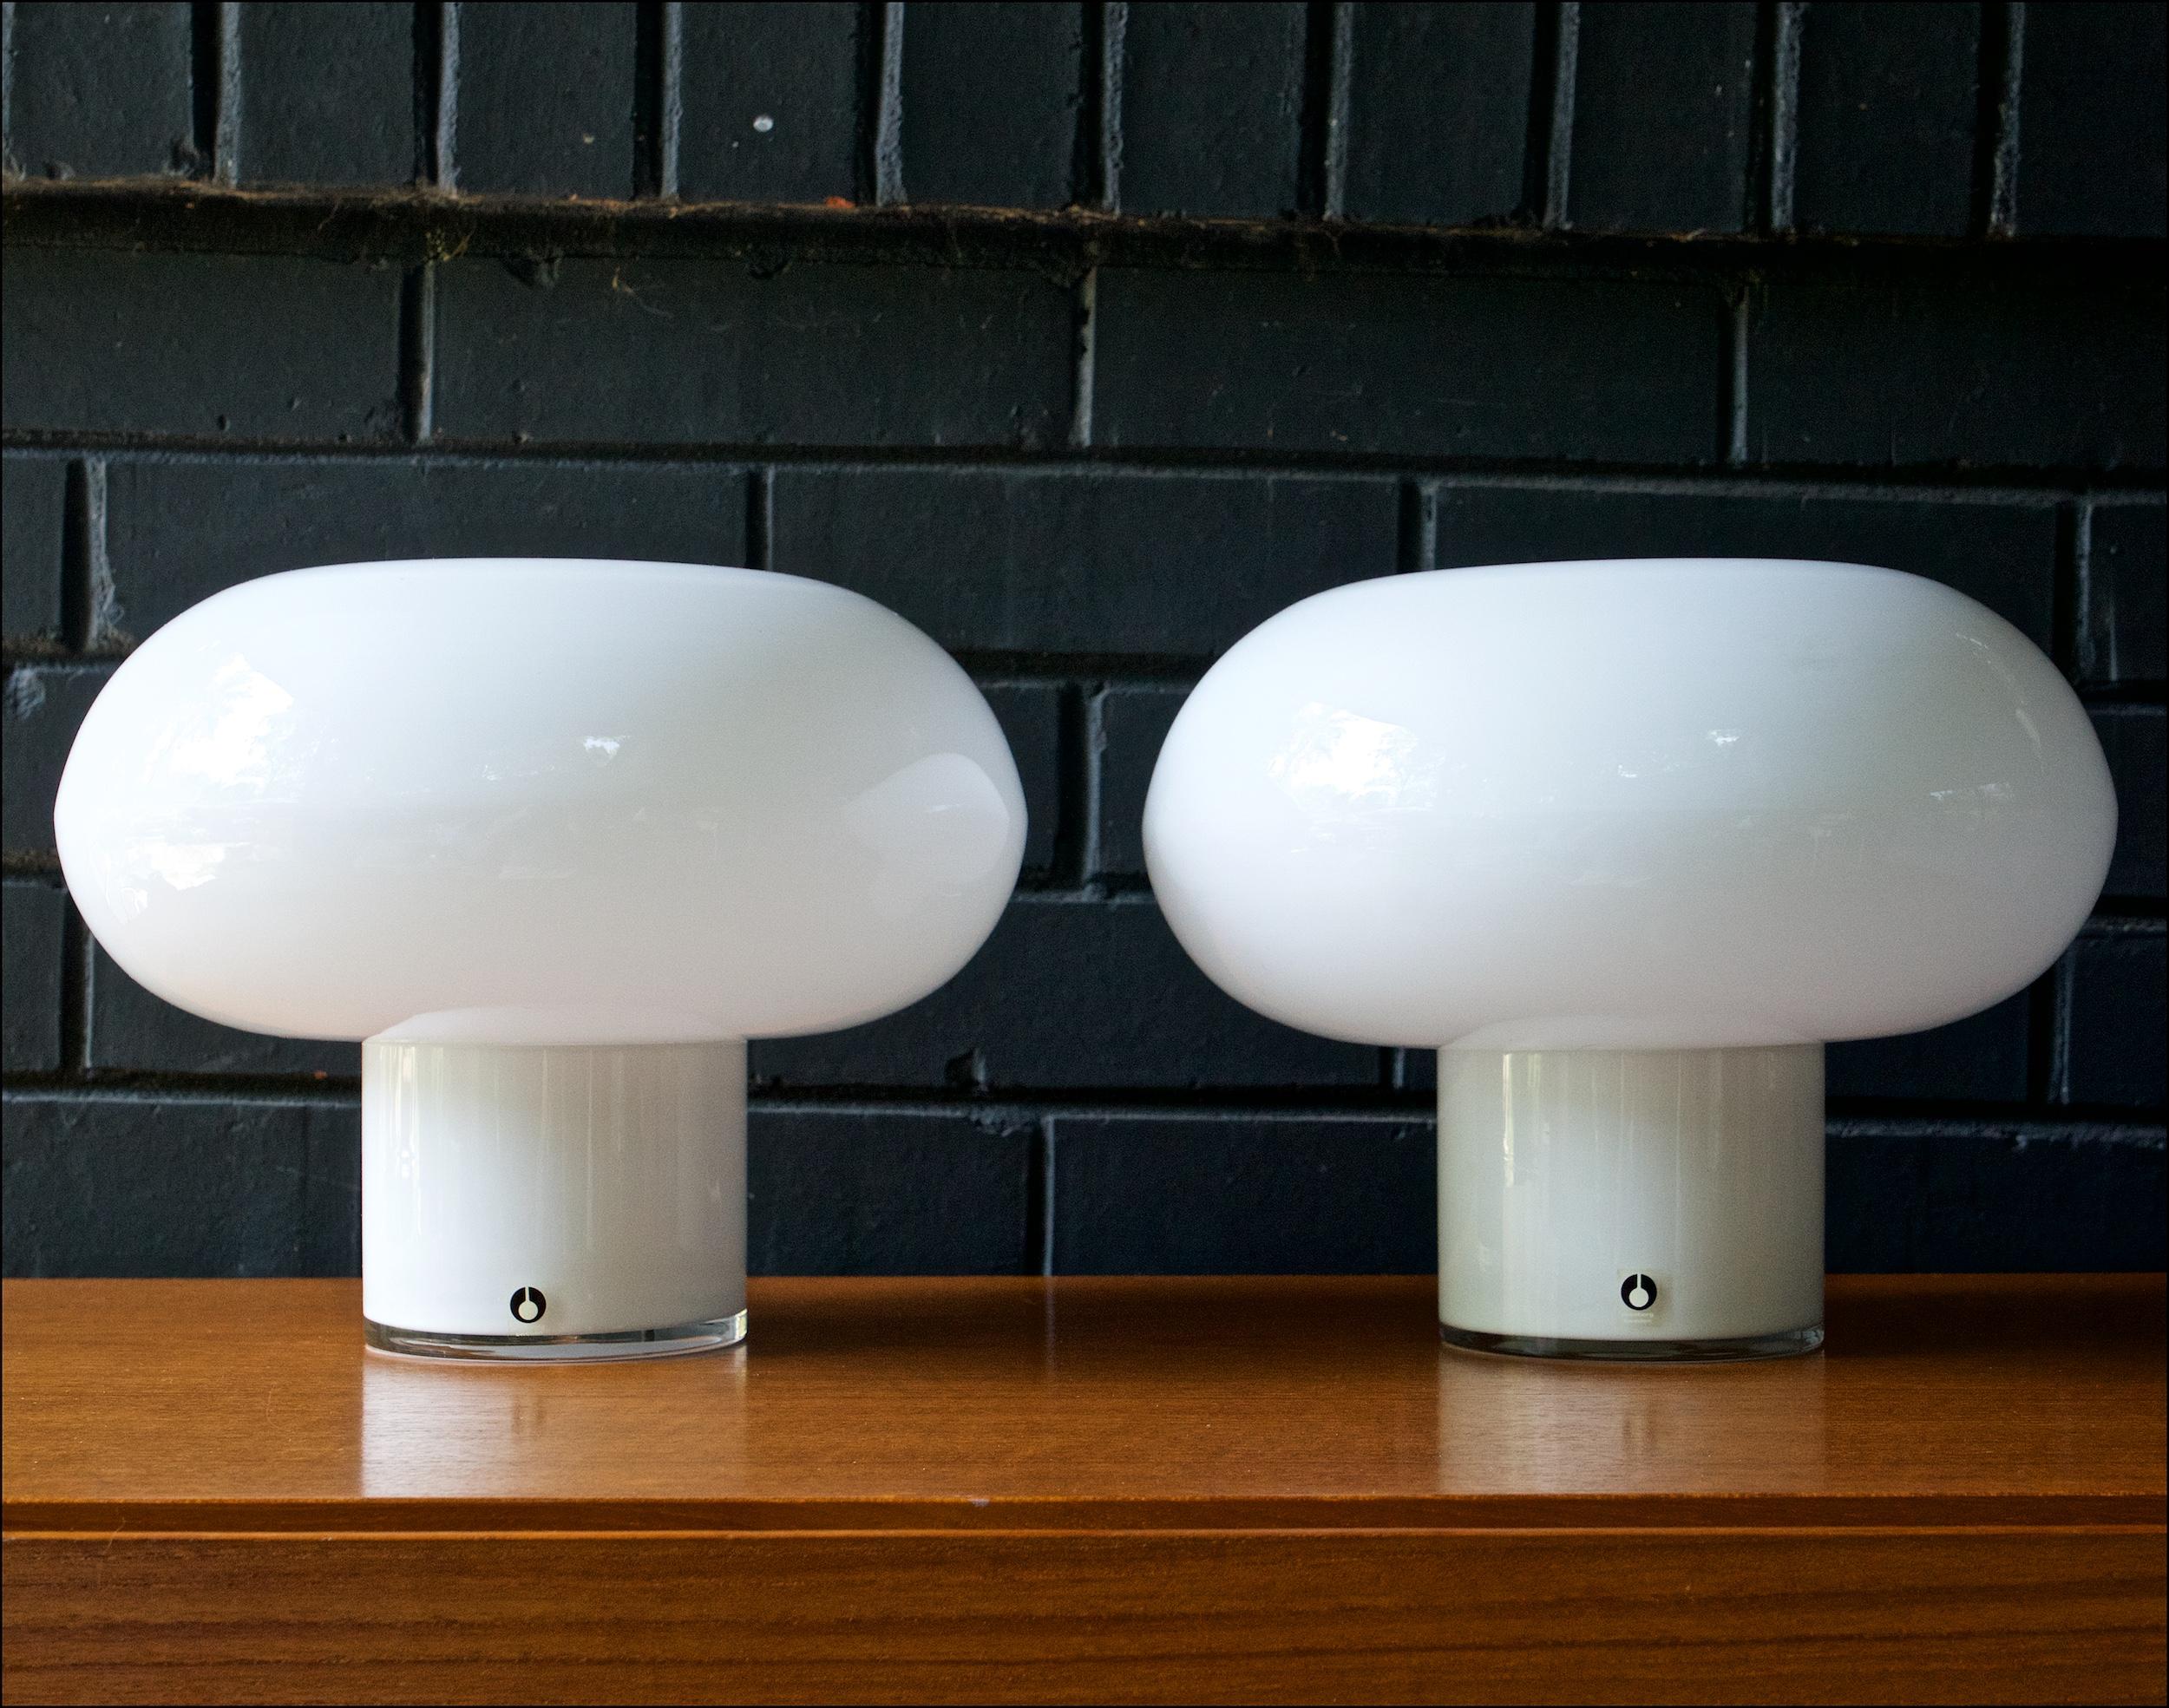 Cased white polished glass globe table lamps by Pukeberg of Sweden. The ellipsoid spherical shade sits on top of a glass cylinder for a minimalist profile. Wired for US and in working order, an in-line cord switch. A pair of wonderful translucent